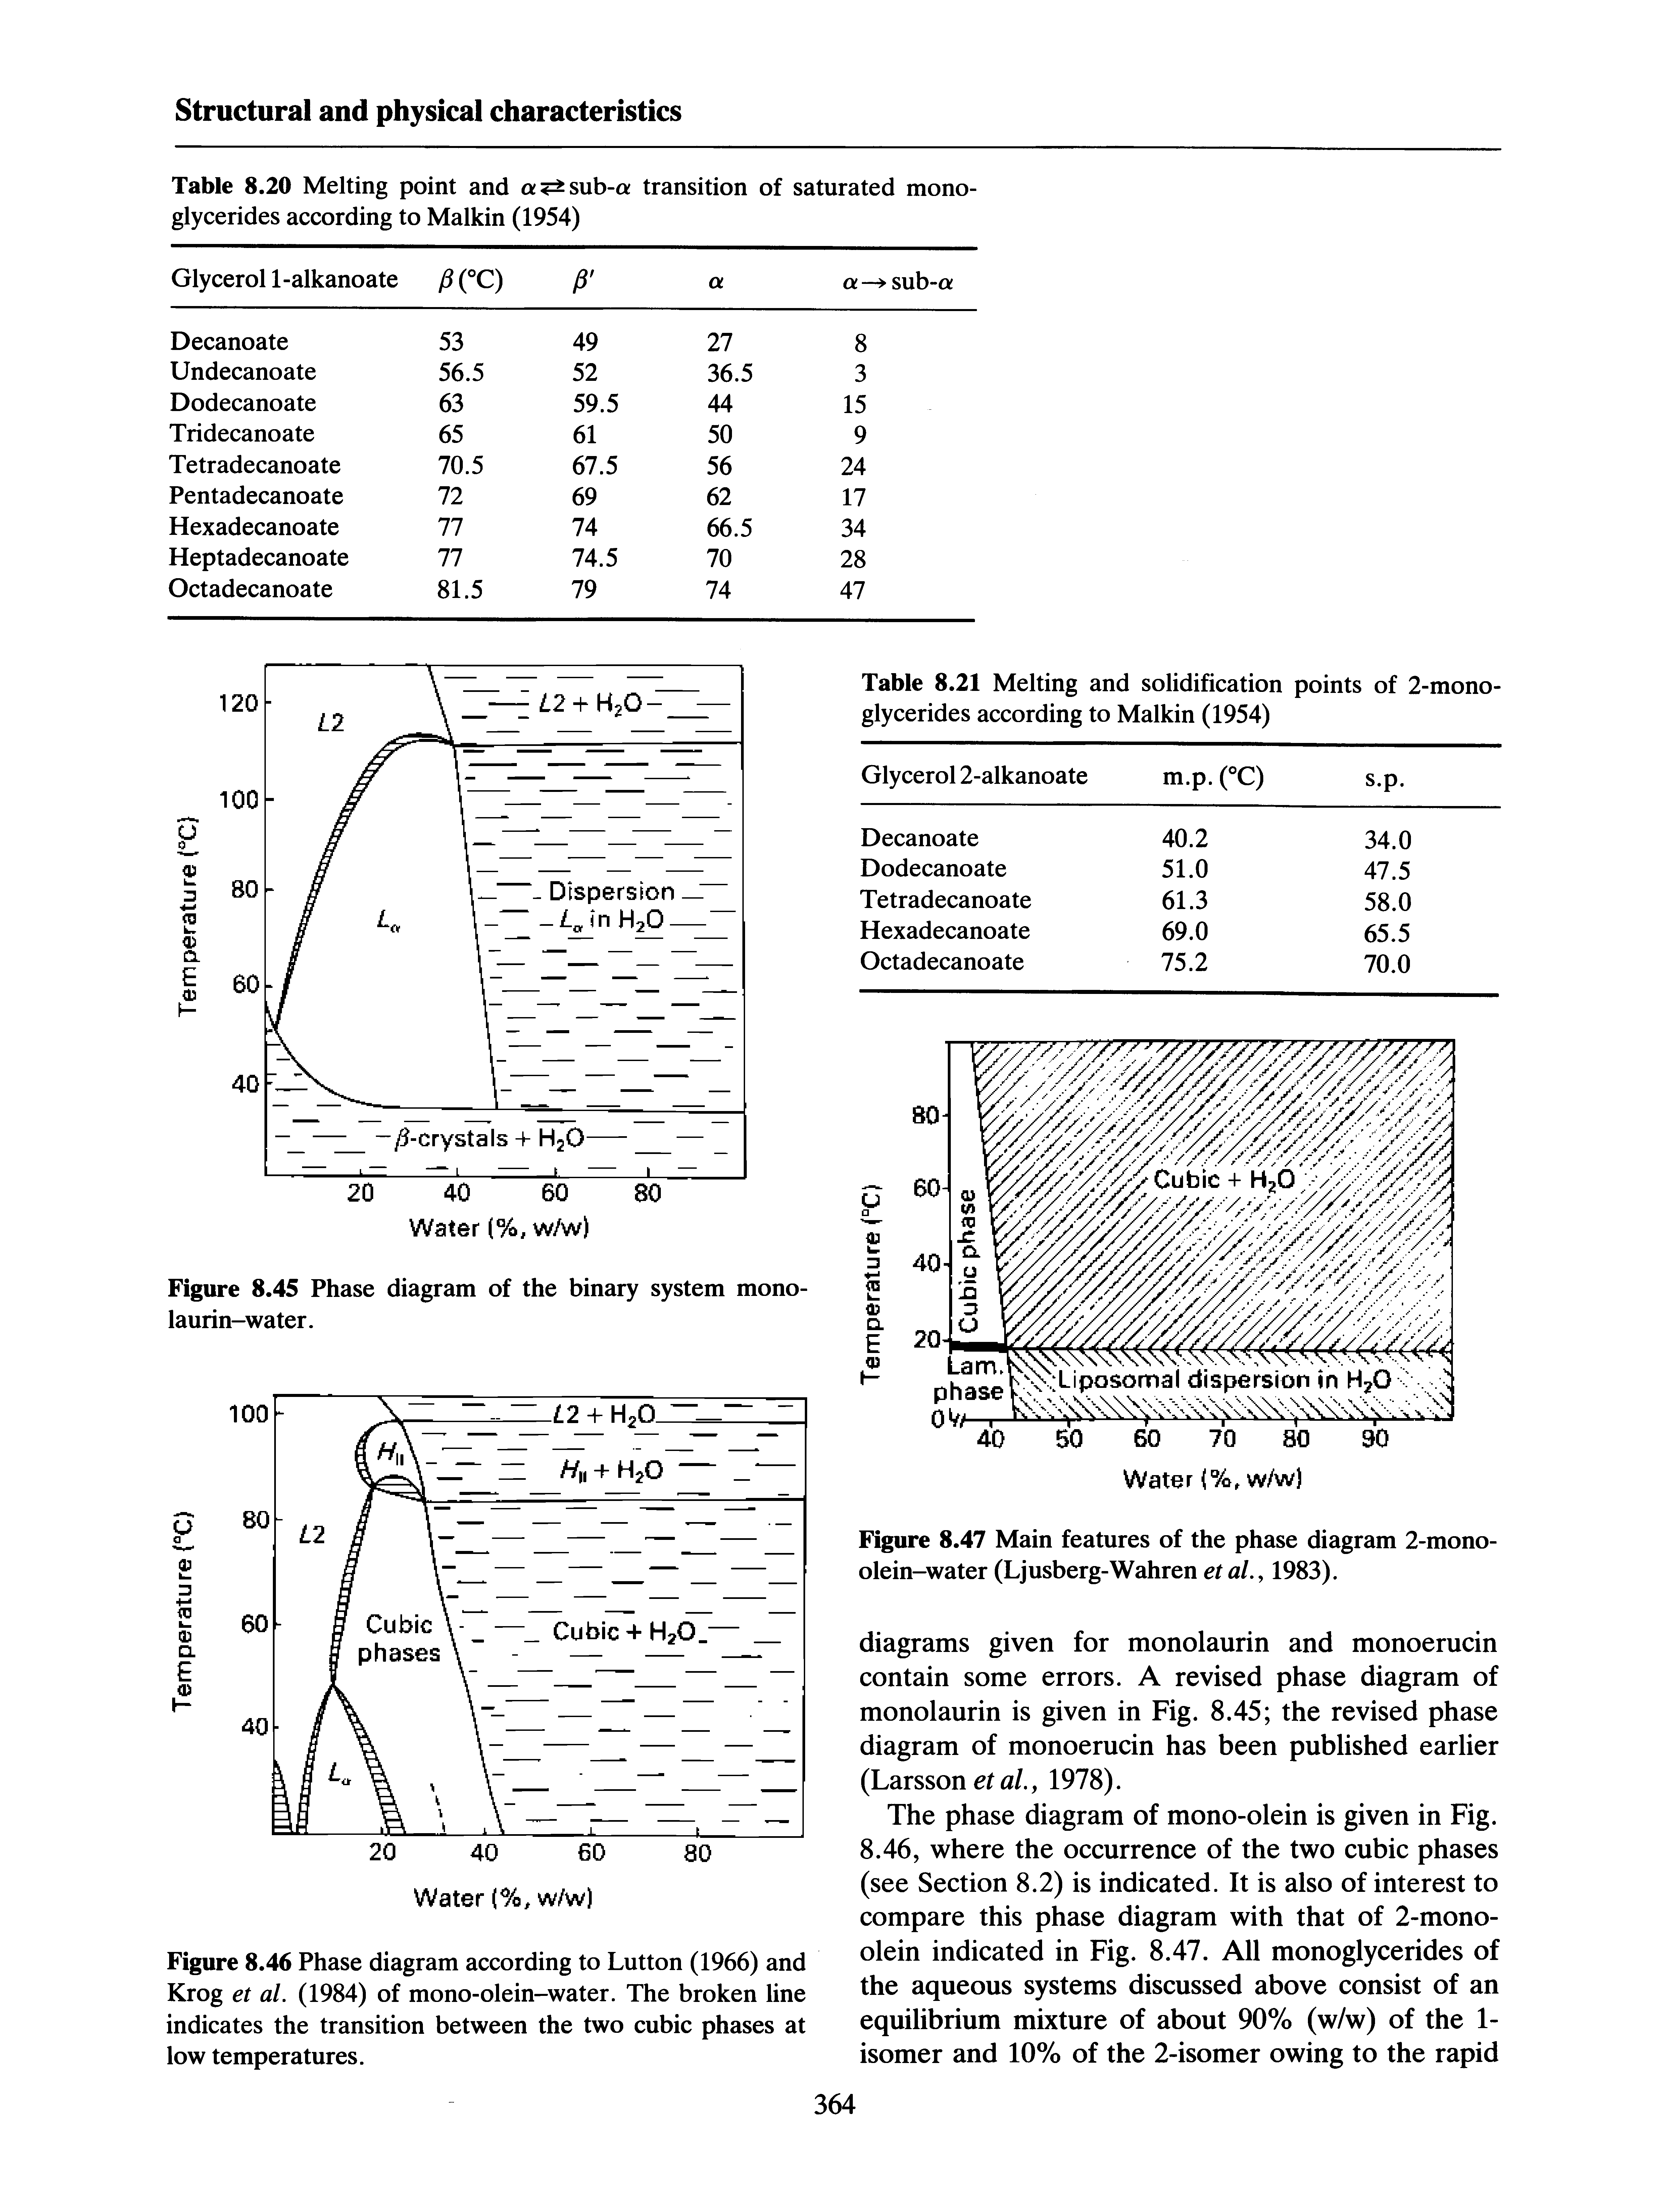 Figure 8.46 Phase diagram according to Lutton (1966) and Krog et al. (1984) of mono-olein-water. The broken line indicates the transition between the two cubic phases at low temperatures.